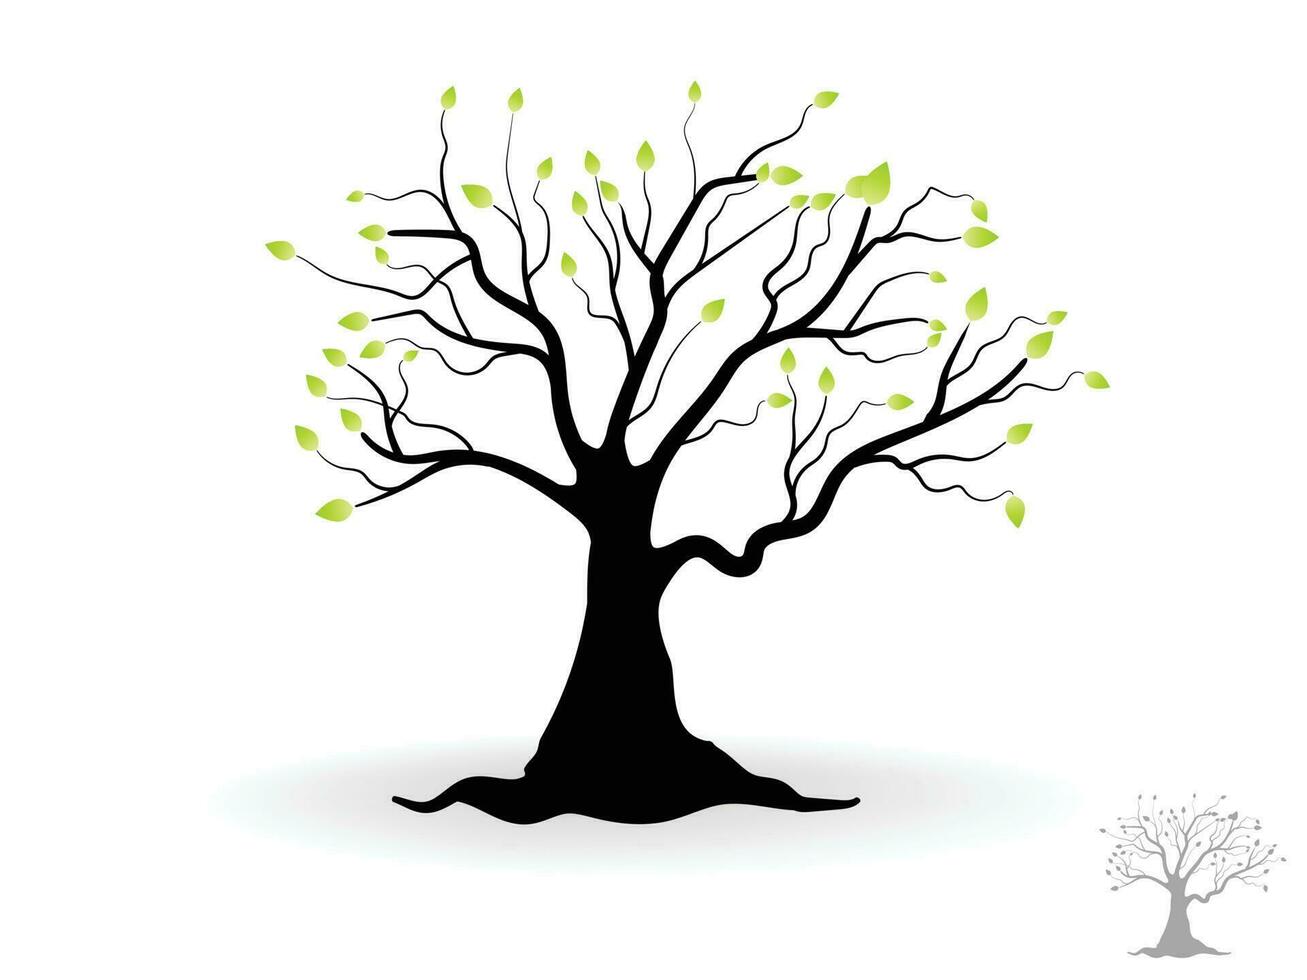 Trees with green leaves look beautiful and refreshing. Tree and roots LOGO style. vector